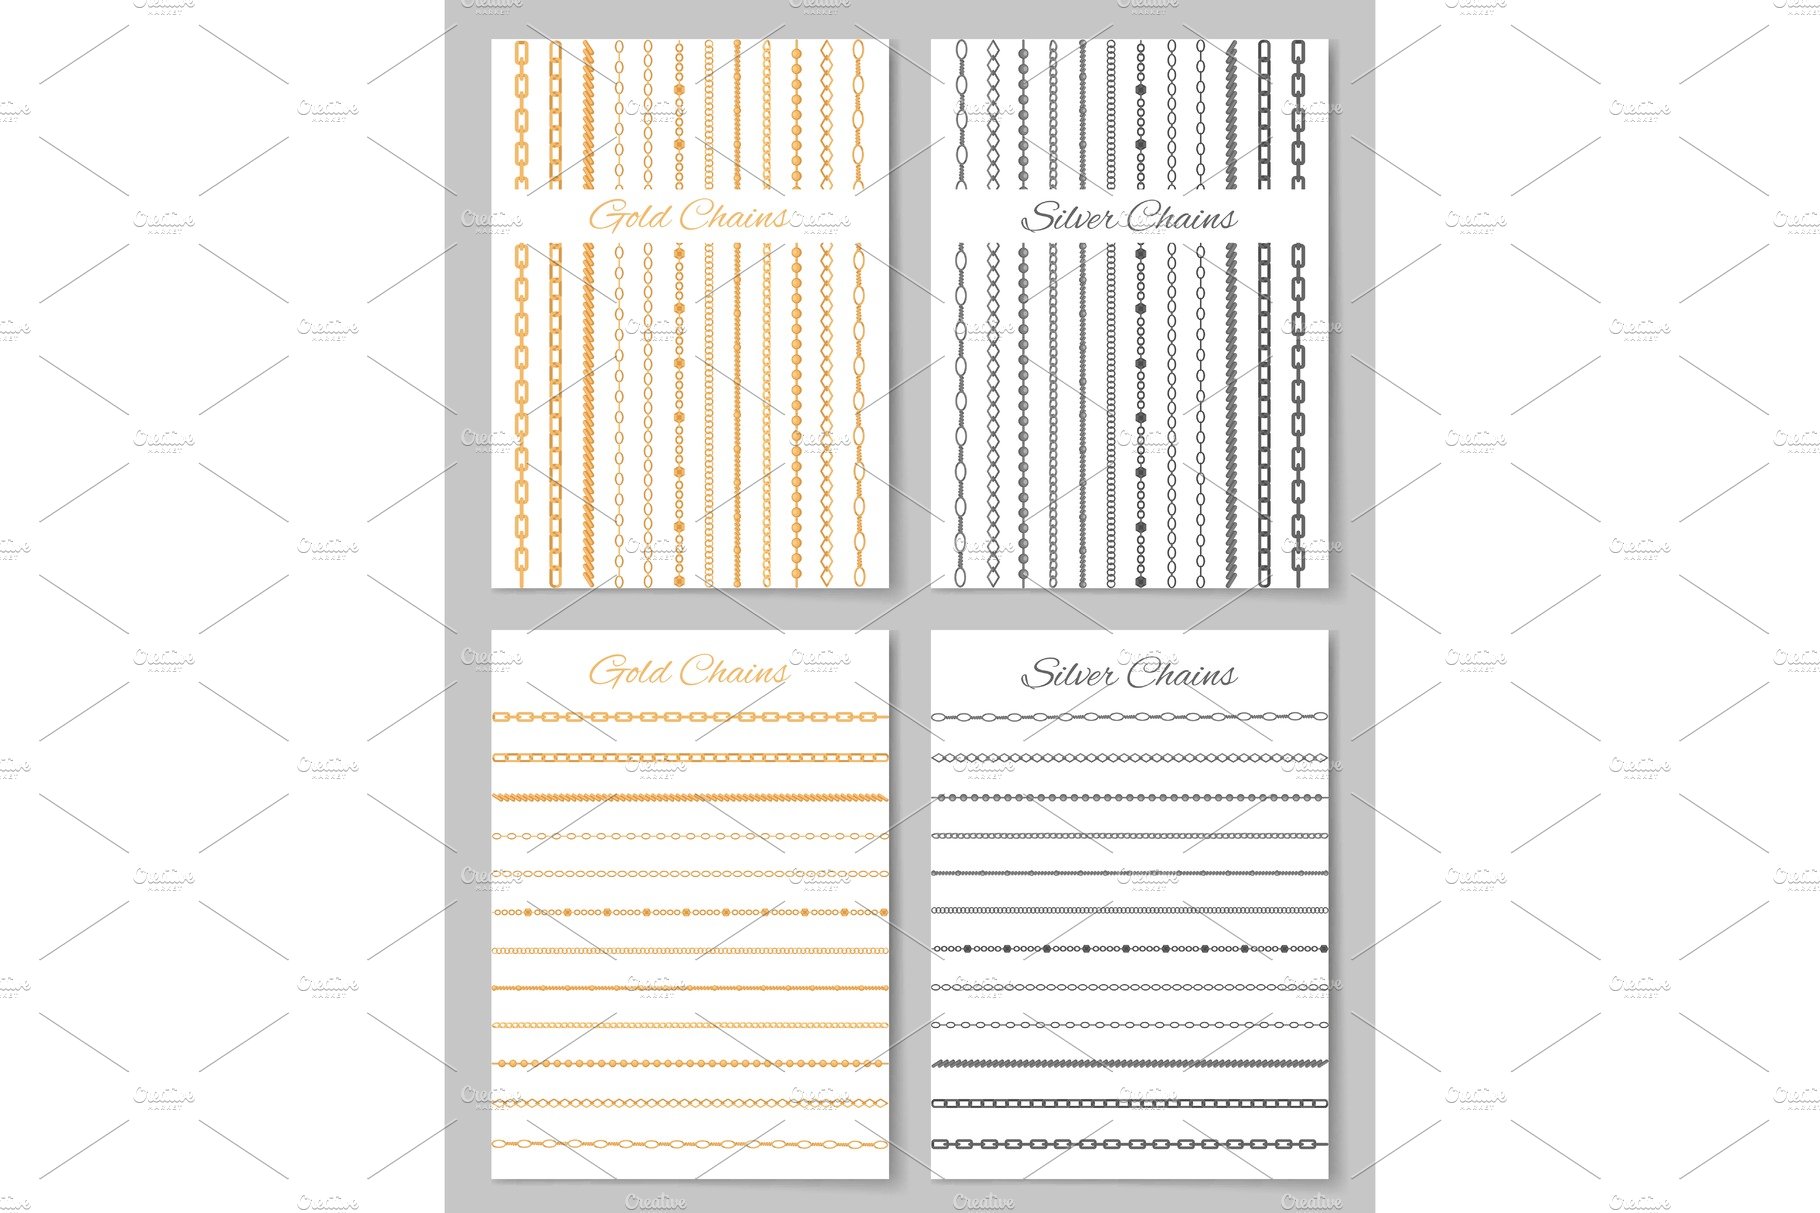 Gold and Silver Chains Posters Vector Illustration cover image.